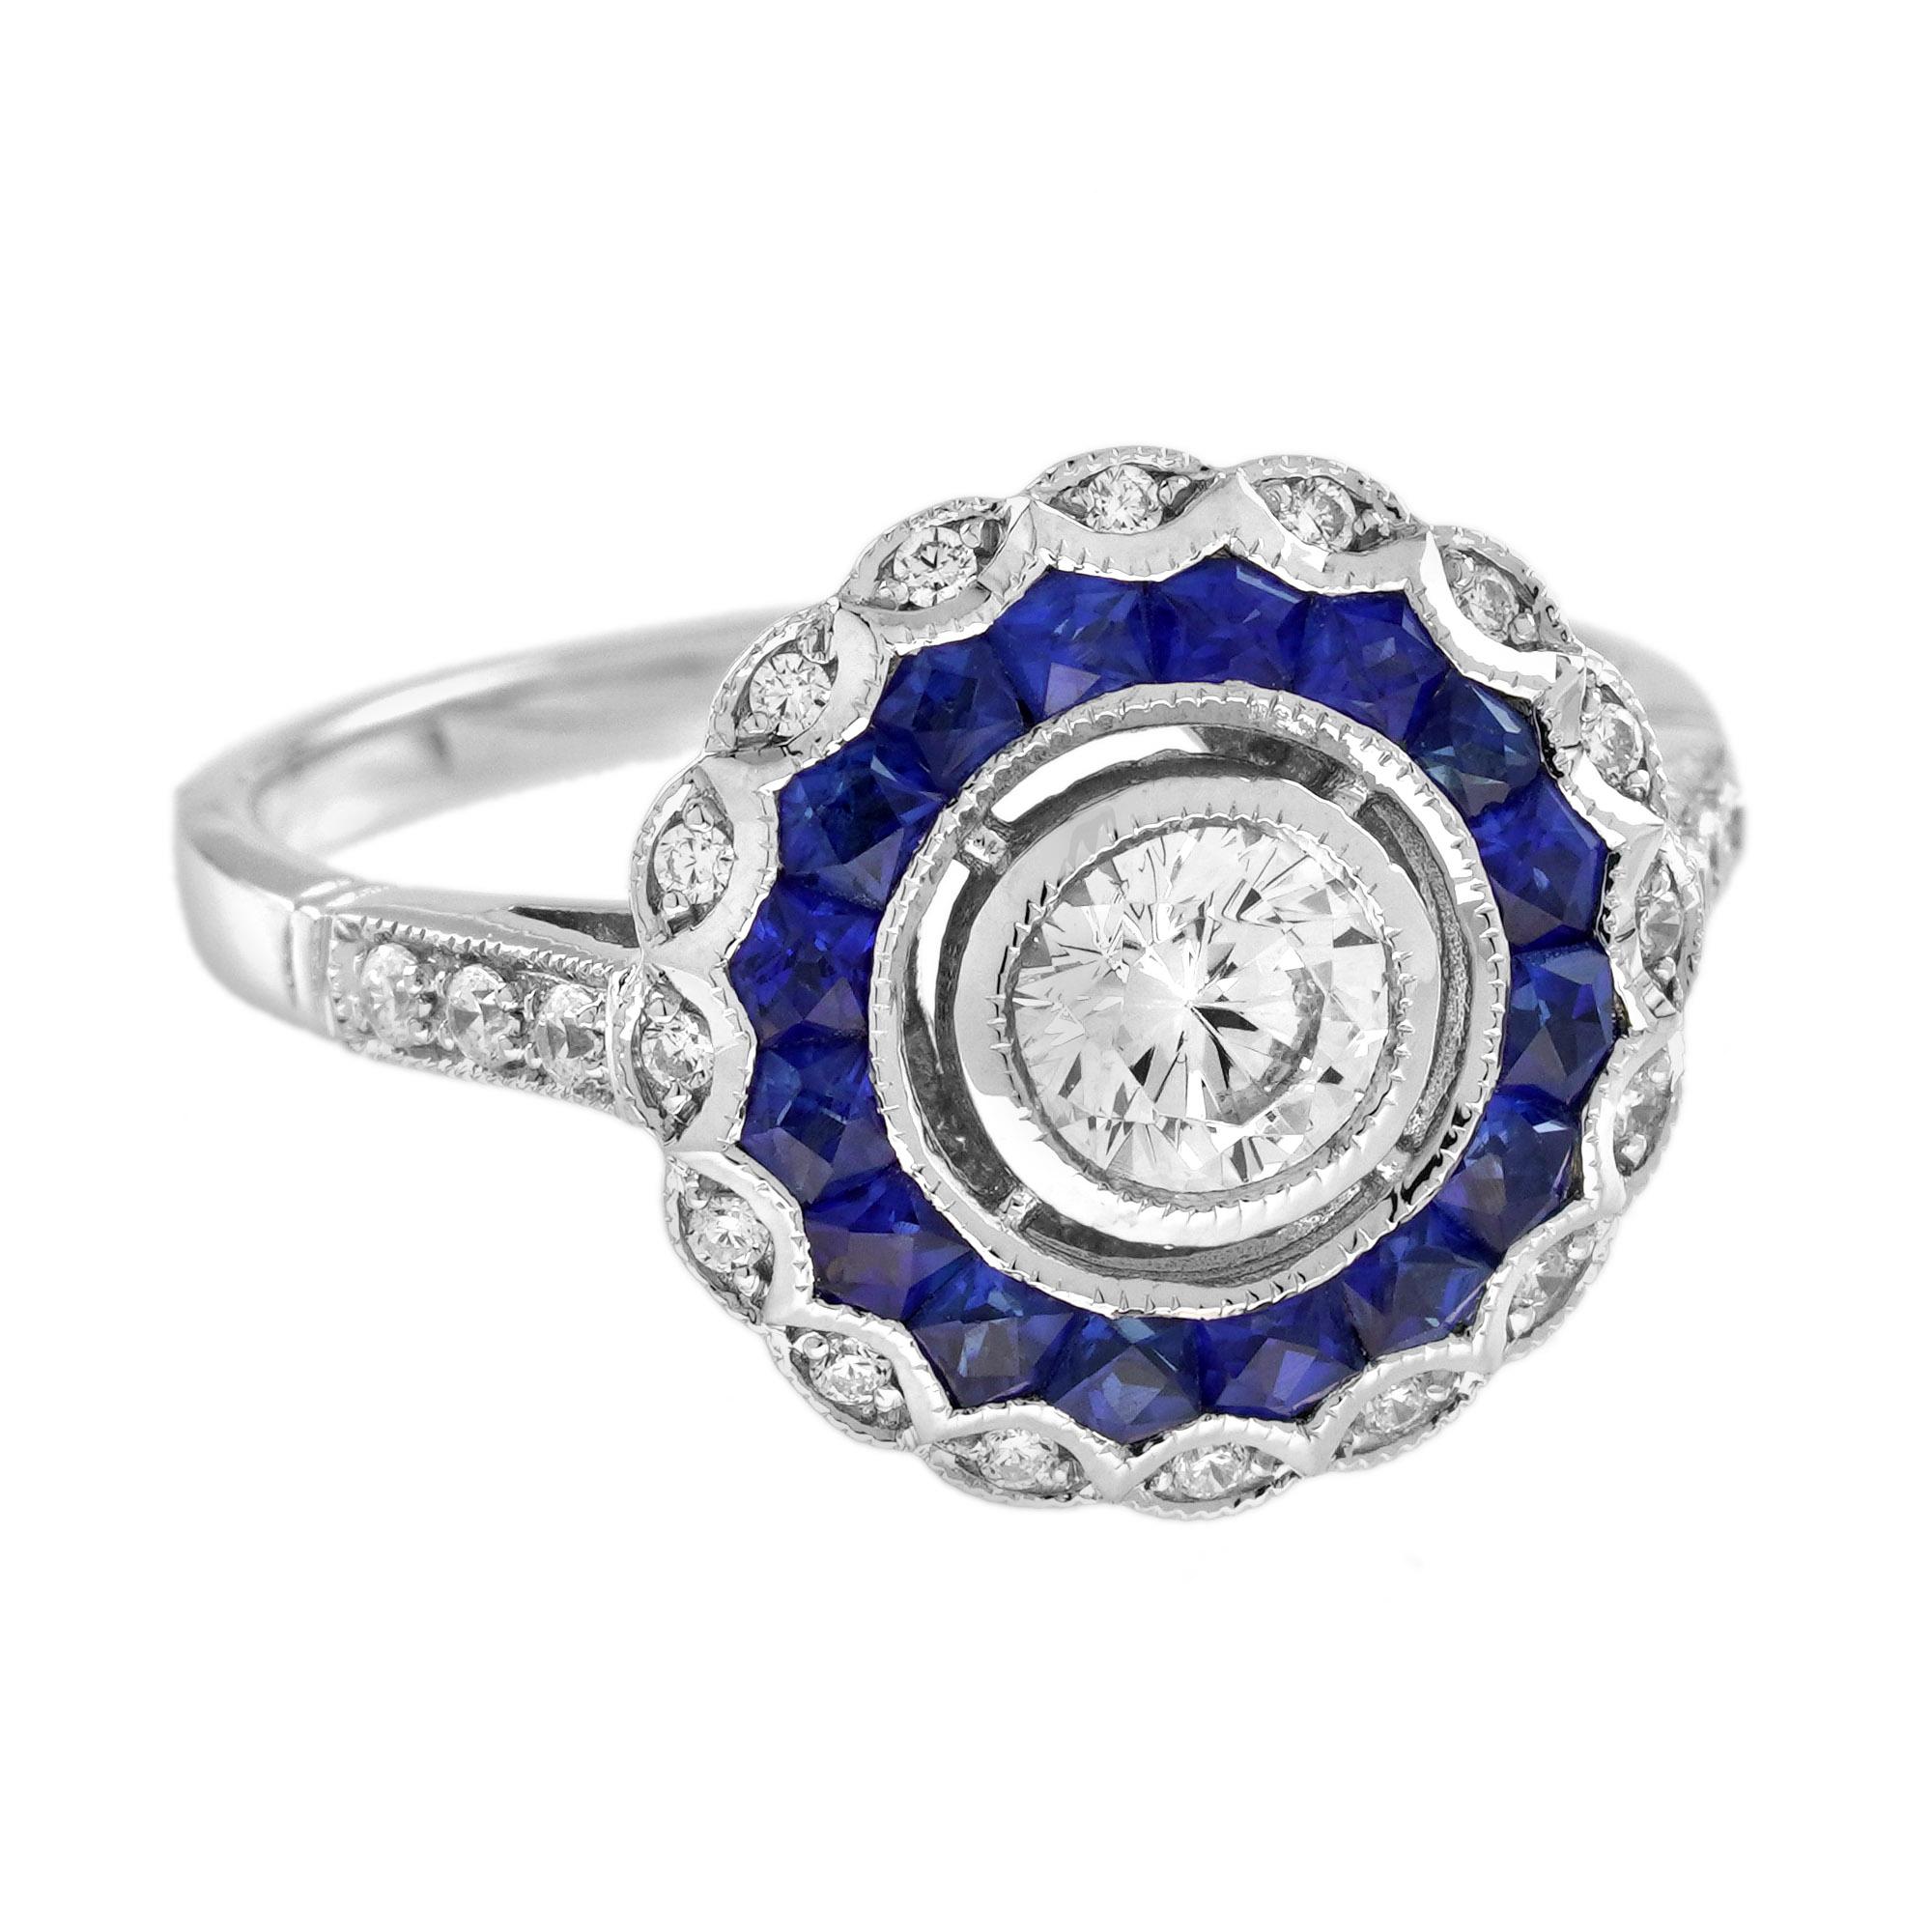 Round Cut 0.5 Ct Diamond Blue Sapphire Art Deco Style Engagement Ring in 18K White Gold For Sale